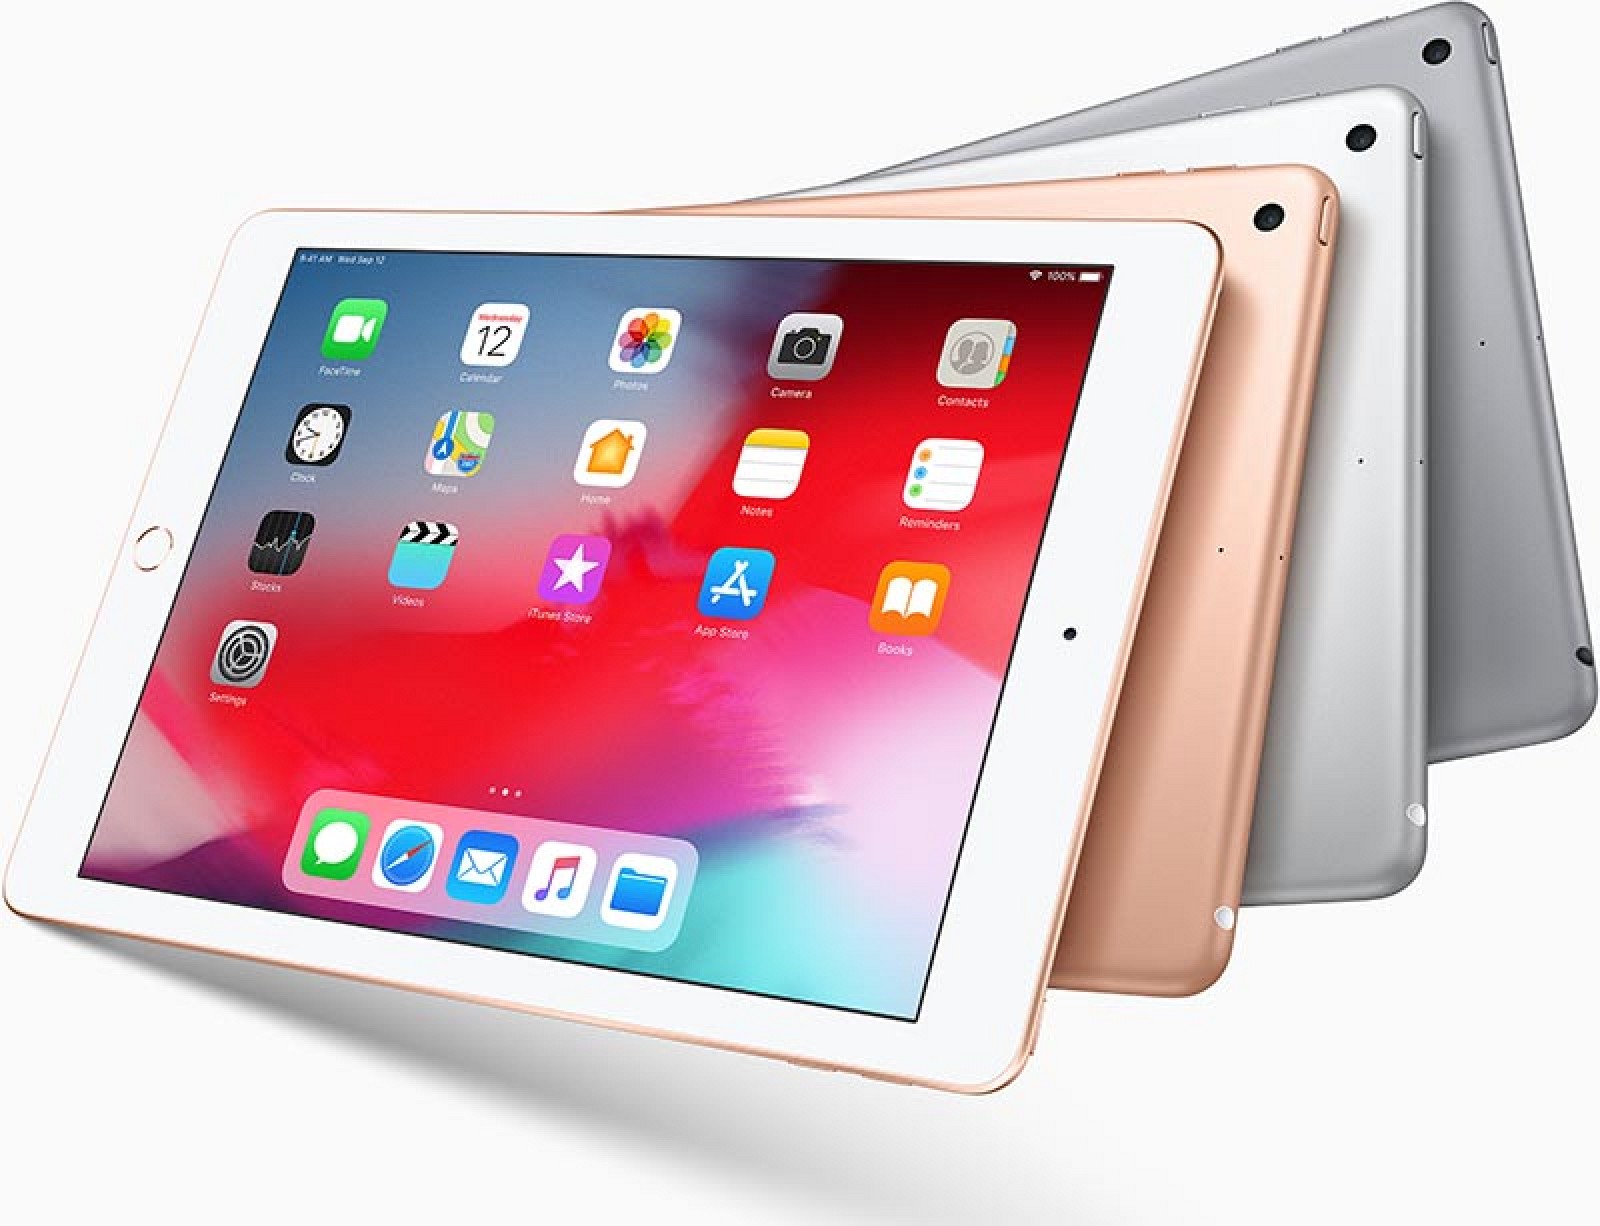 10.2-Inch iPad Said to Launch in the Fall as Successor to 9.7-Inch iPad